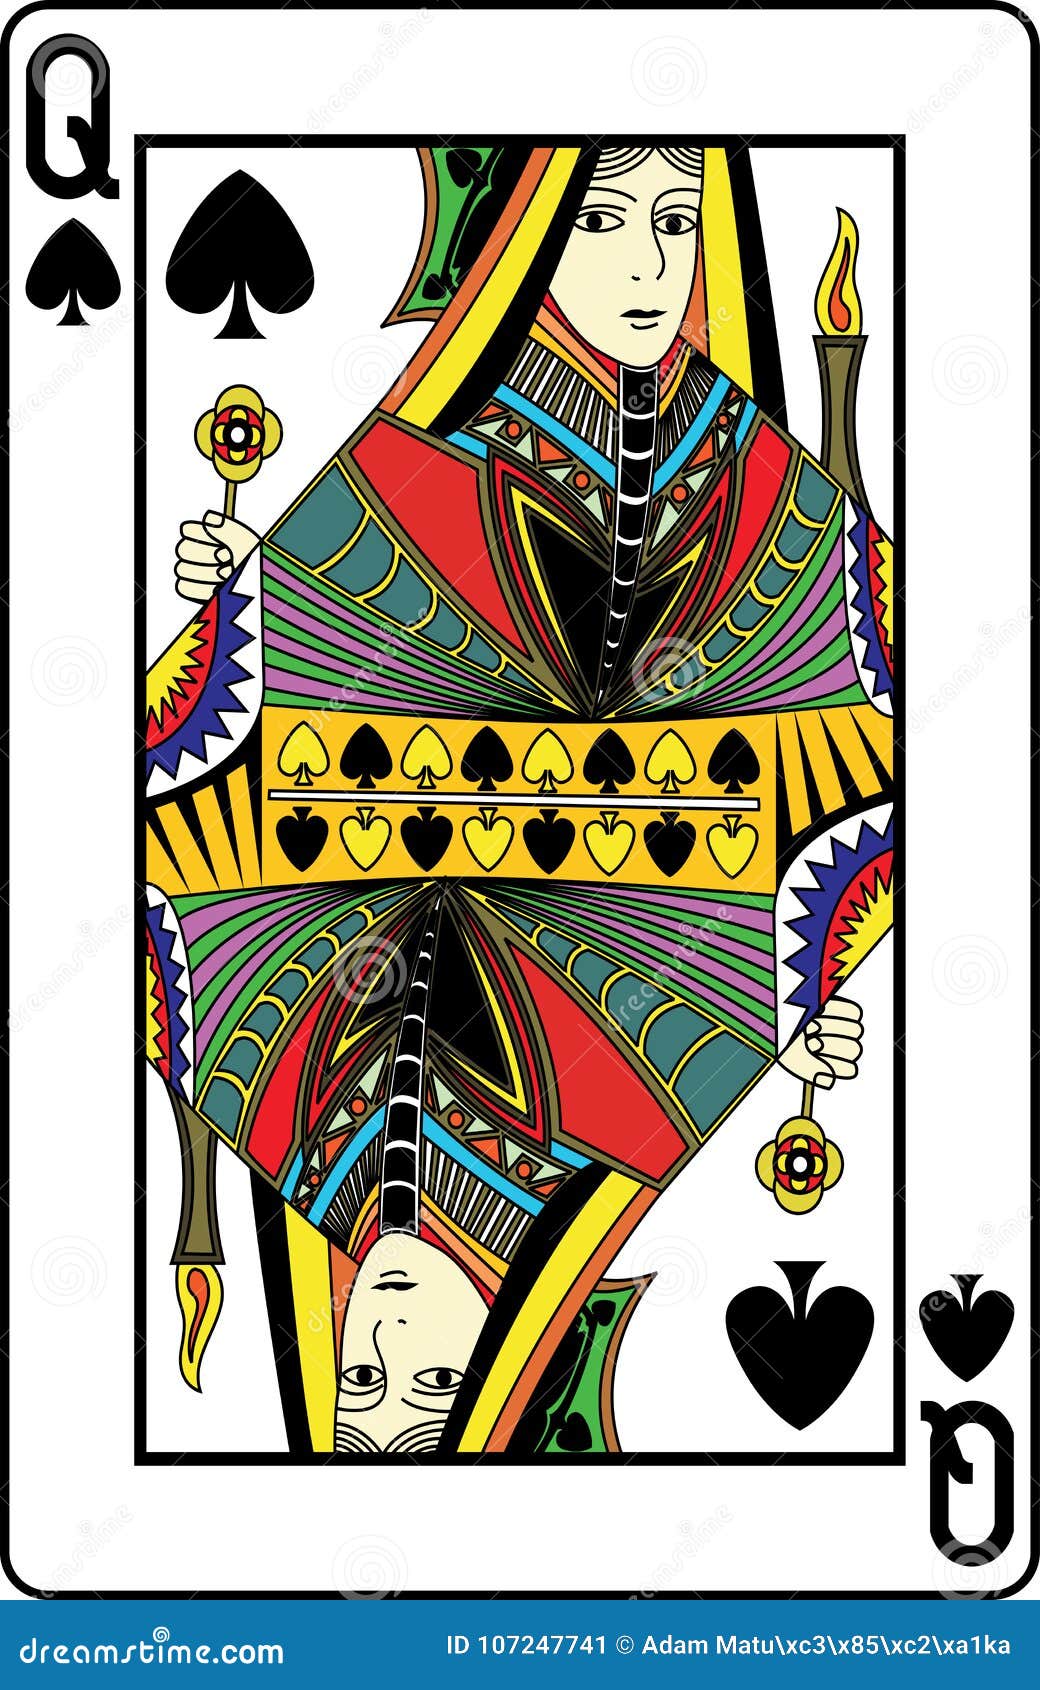 Queen of spades stock vector. Illustration of play, entertainment ...